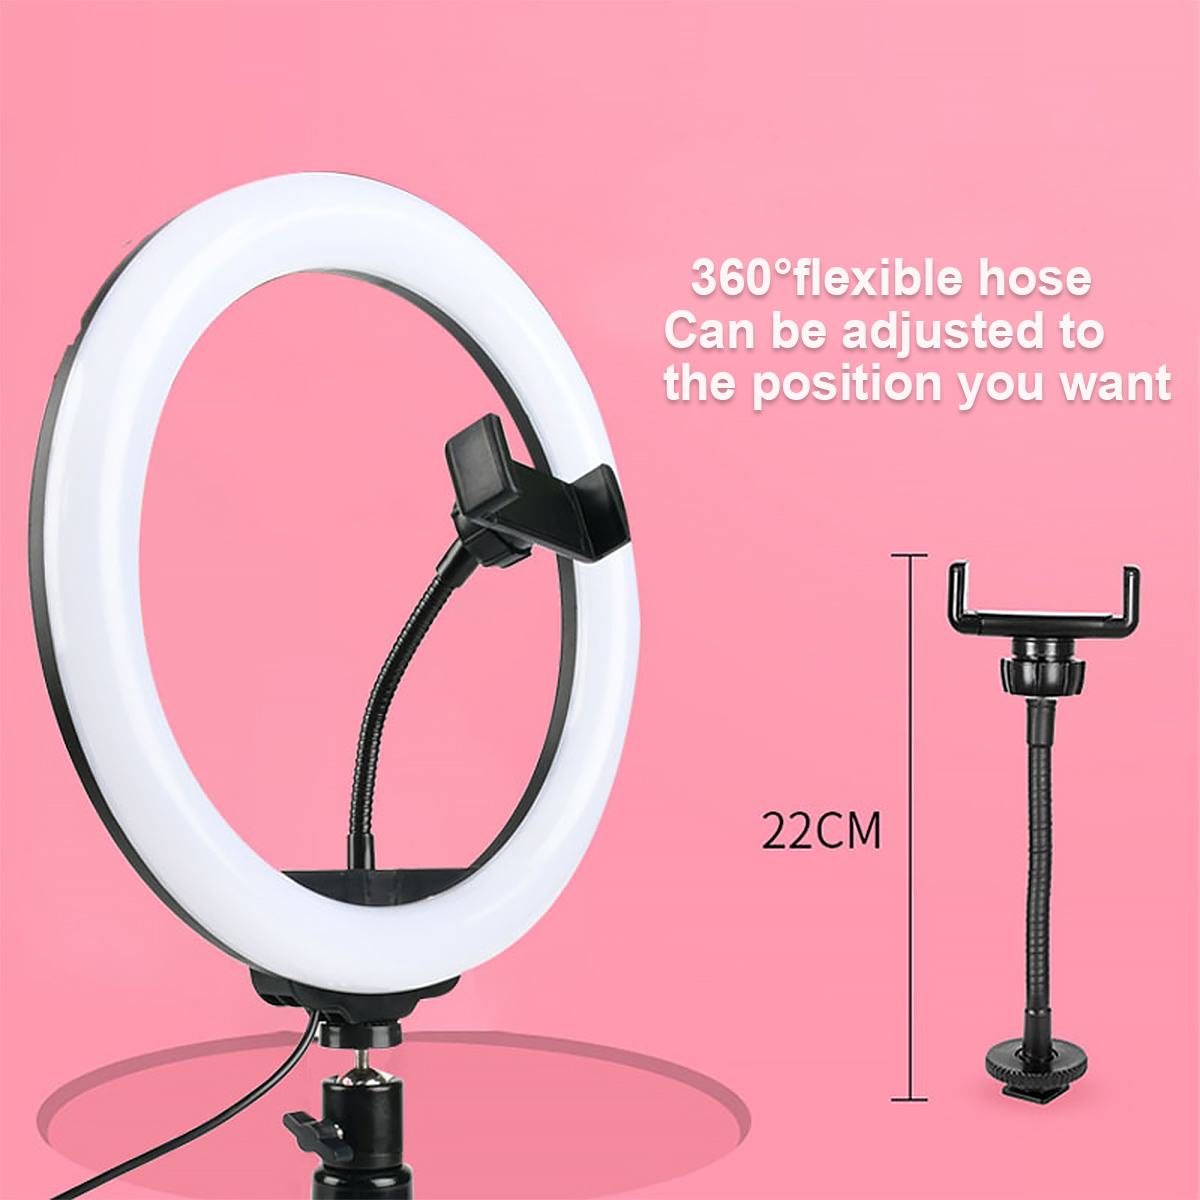 10-inch-LED-Ring-Fill-Light-3-Modes-of-Color-Temperature-Colorful-RGB-Live-Broadcast-Desktop-Phone-H-1871503-5